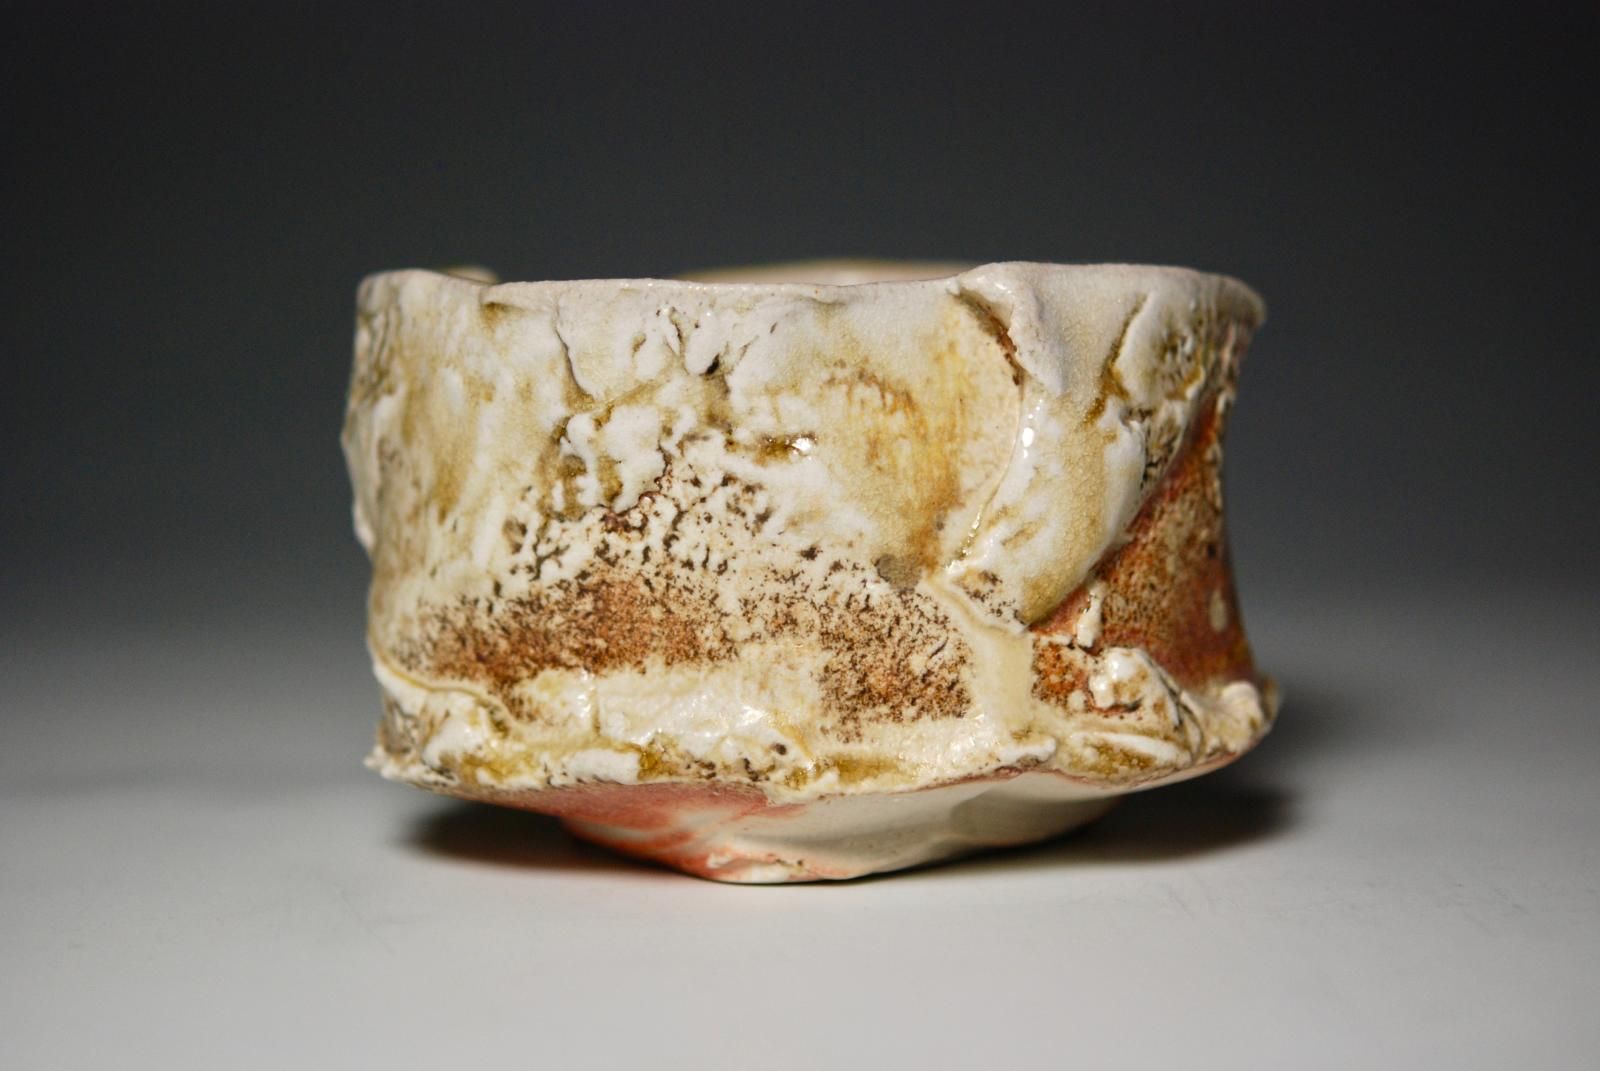 Chizenyu ChawanHand carved and hollowed ( Kurinuki technique ) stoneware. Natural ash glaze and anagama kiln fired for 5 days to cone 12. Honorable mention - Workhouse Clay International 2017, Workhouse Arts Centre, Lorton, VA.  Juror Chris GustinWith wooden box by Lucien Koonce